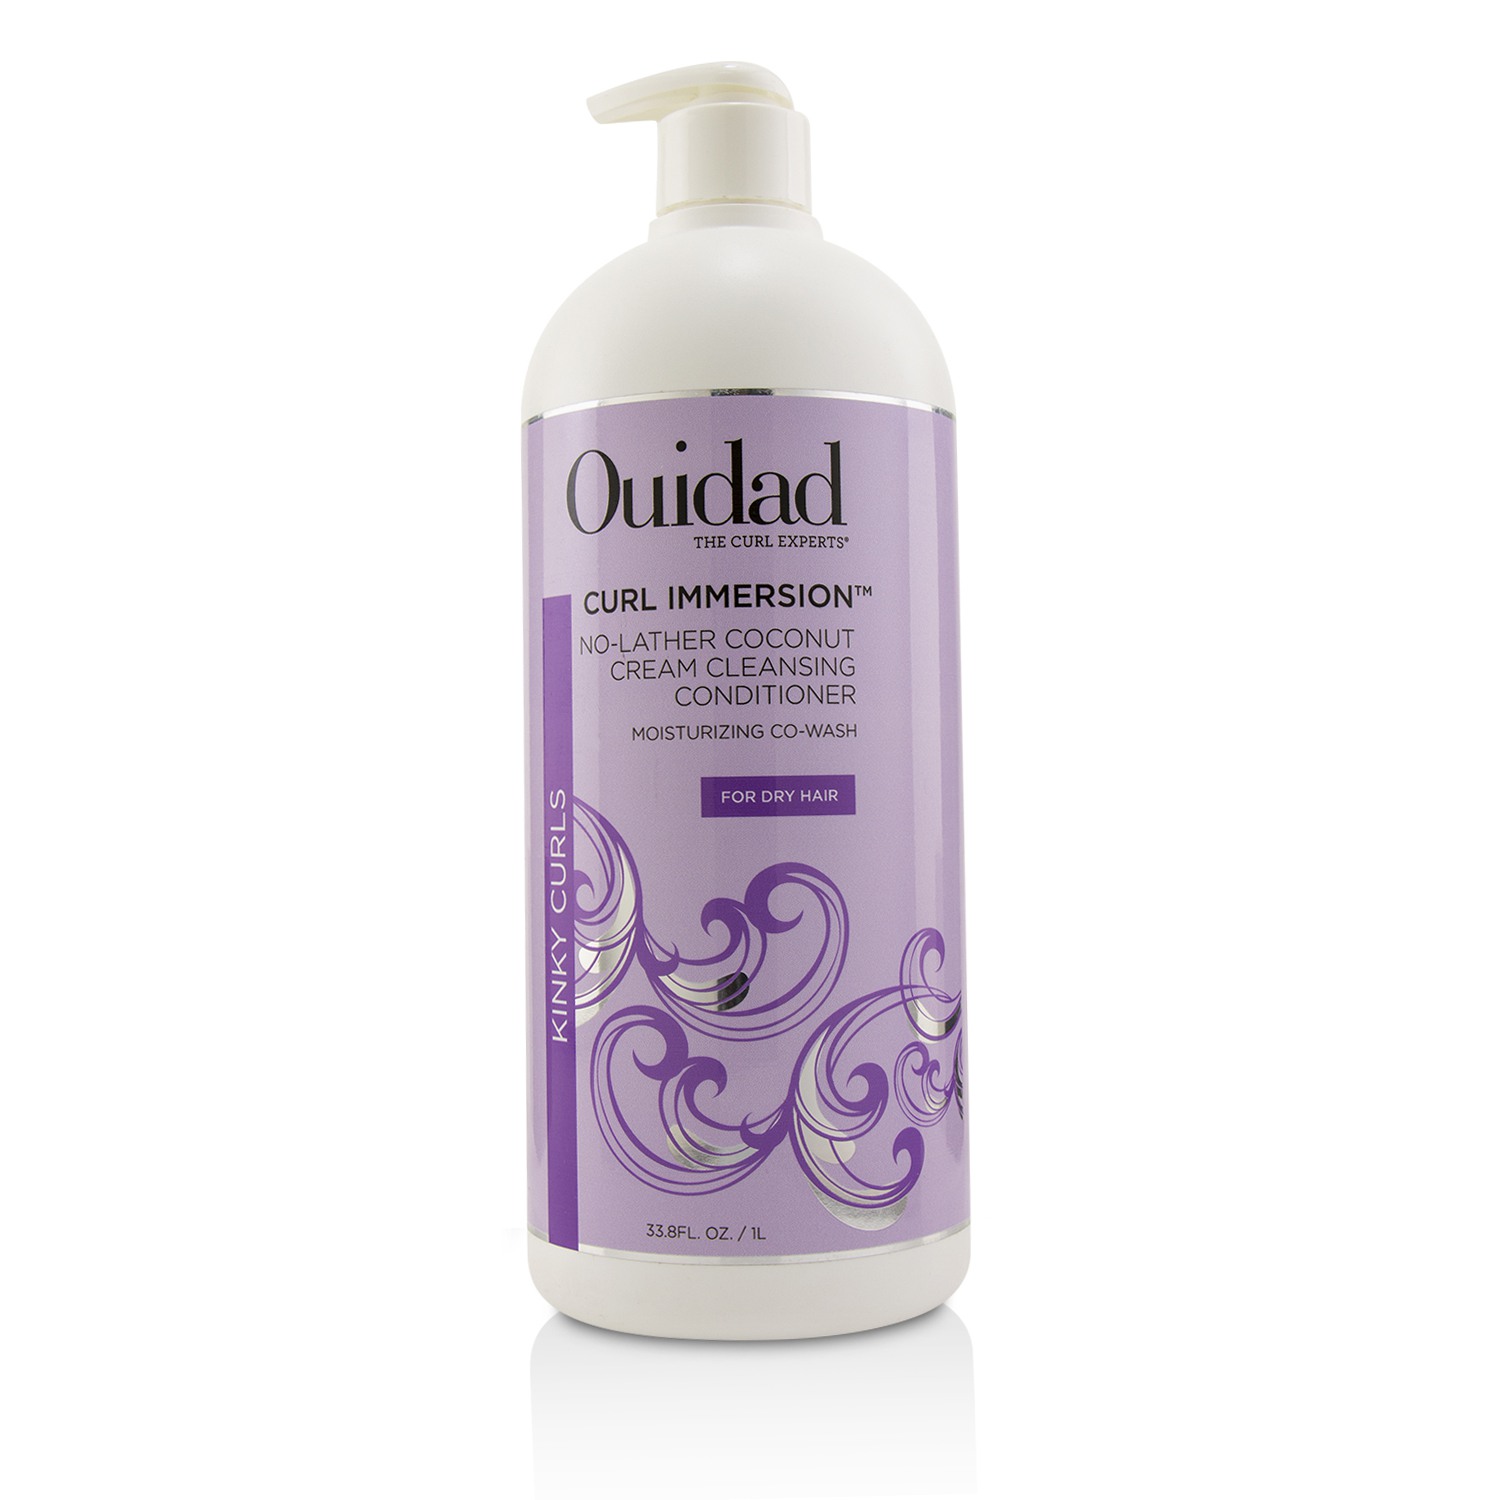 Curl Immersion No-Lather Coconut Cream Cleansing Conditioner (Kinky Curls) Ouidad Image